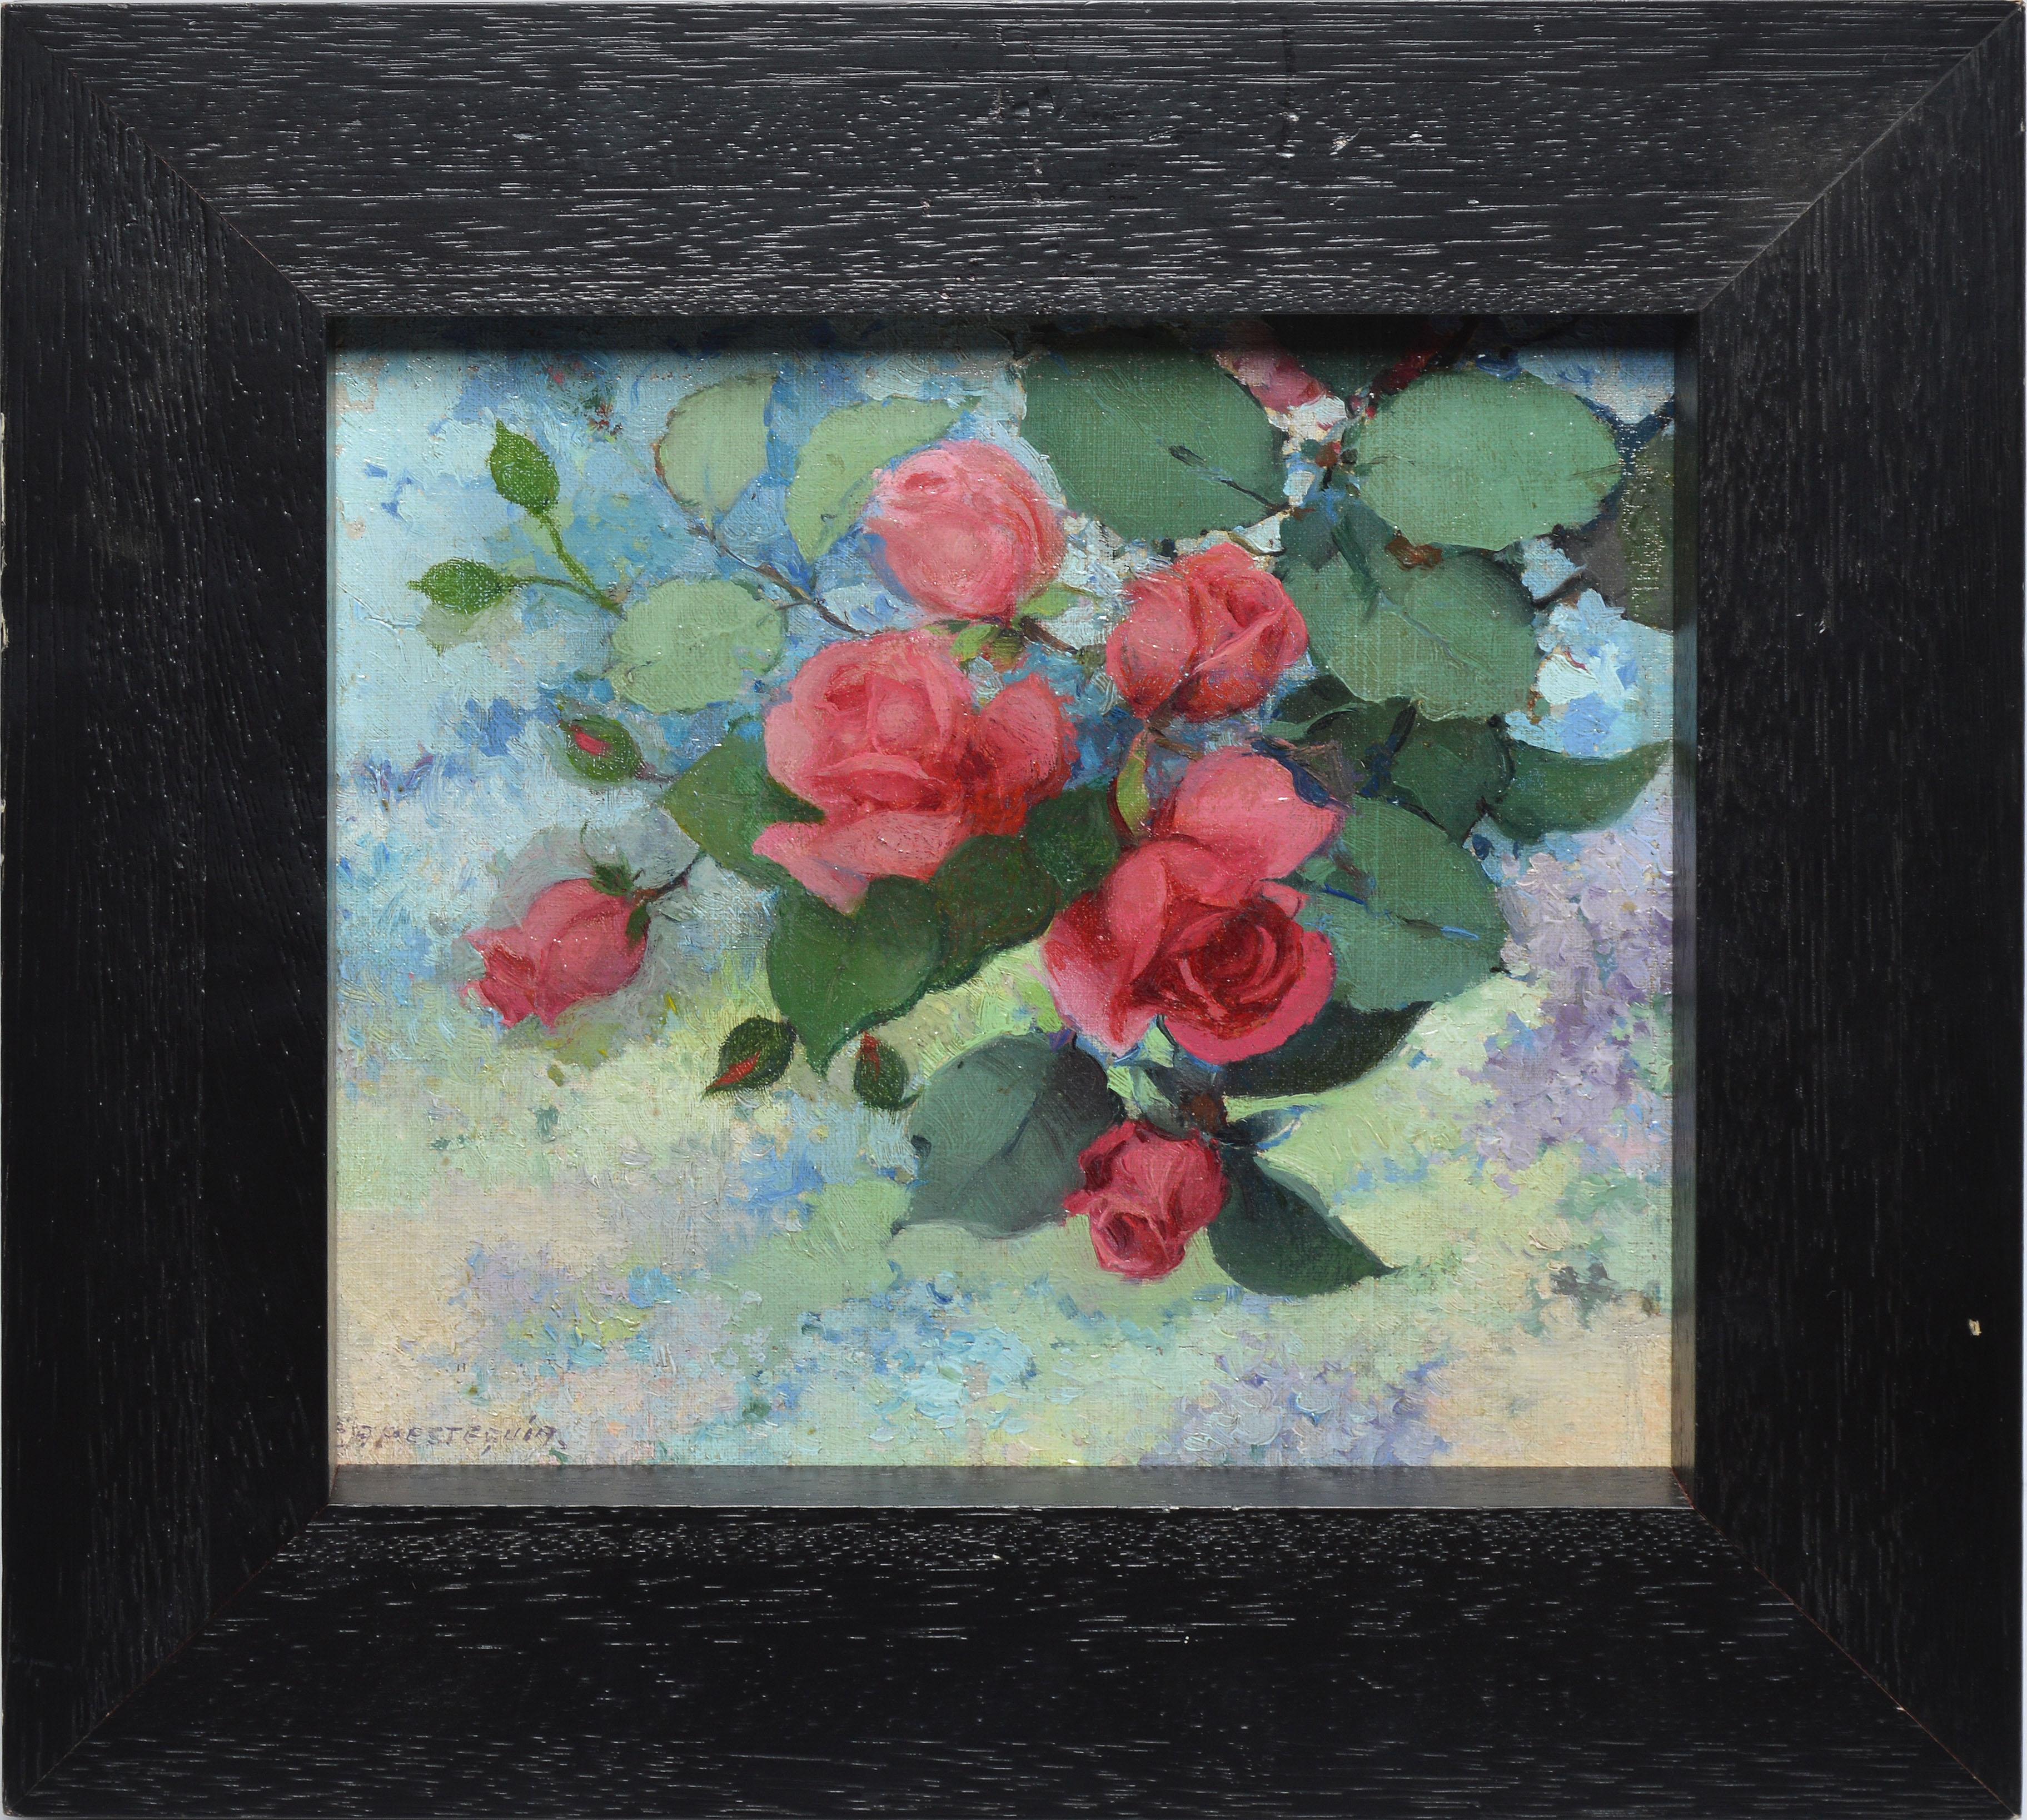 Antique Peruvian impressionist oil painting of flowers by Efren Pelayo Apesteguia  (born 1900).  Oil on canvas, circa 1930.  Signed lower left.  Displayed in an impressionist frame.  Image size, 10"L x 9.5"H, overall 14.5"L x 13.5"H.